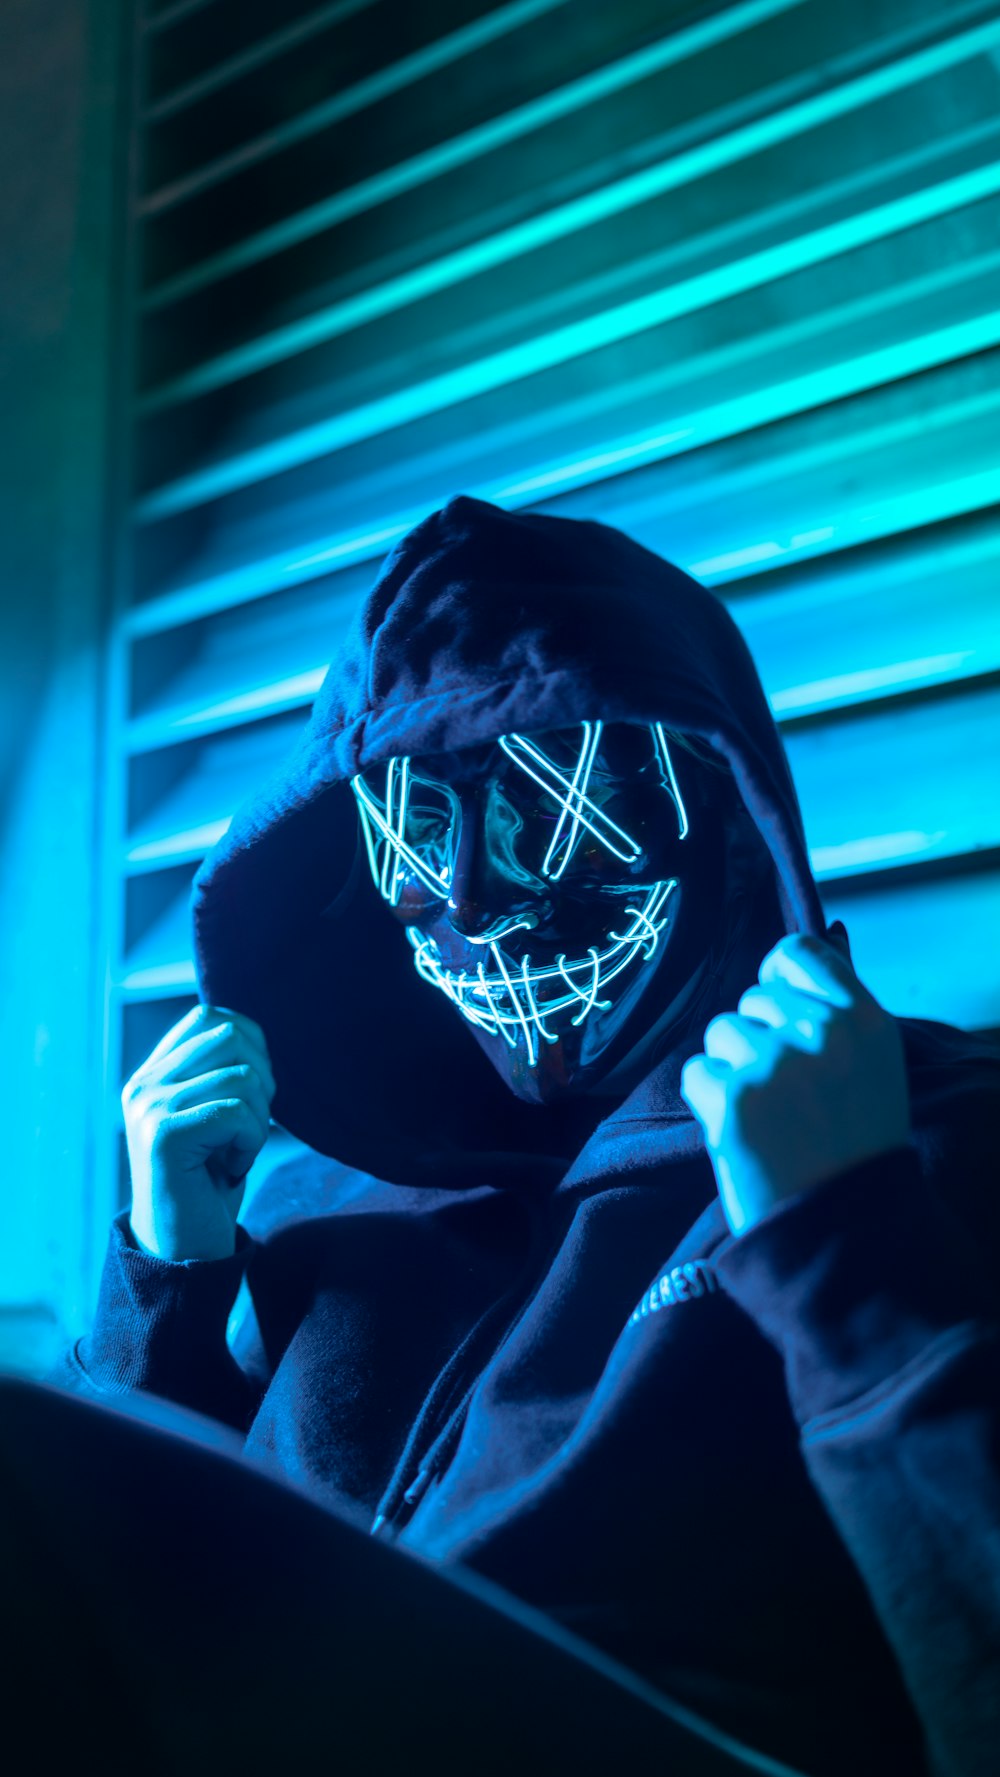 A person wearing a neon mask in a dark room photo – Free Downtown austin  Image on Unsplash